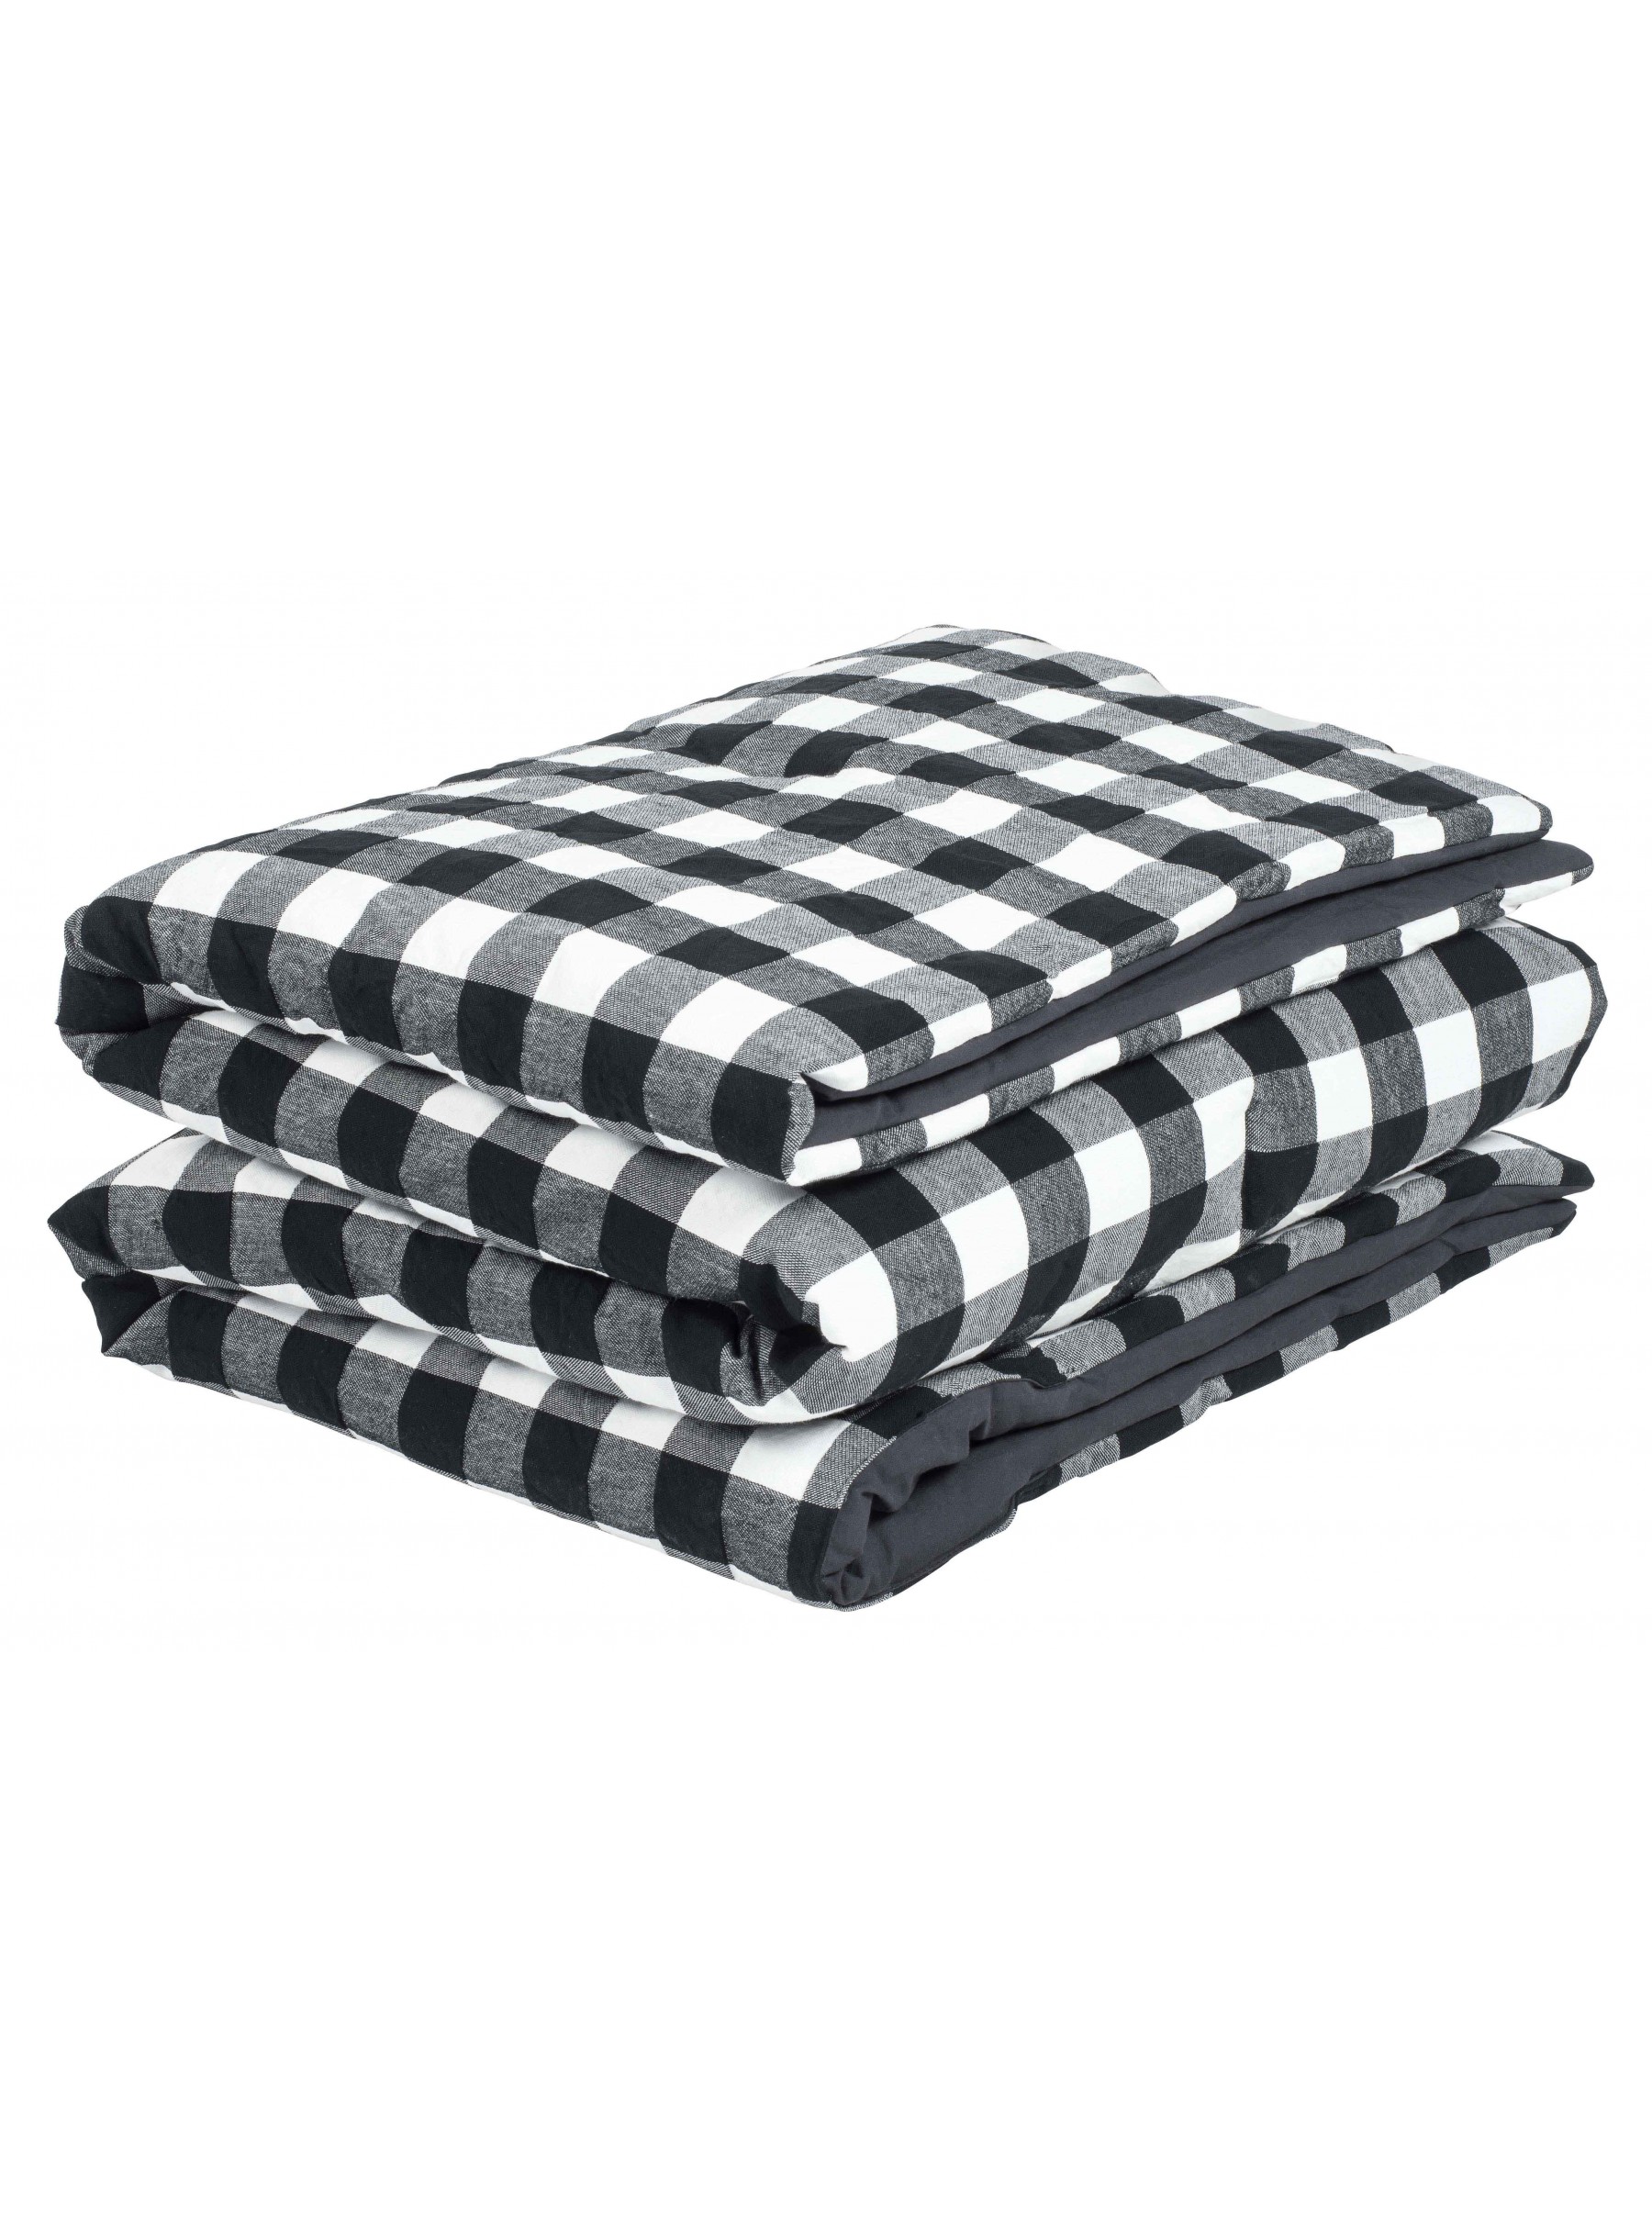 QUILTED BLANKET MAX CAVIAR 110